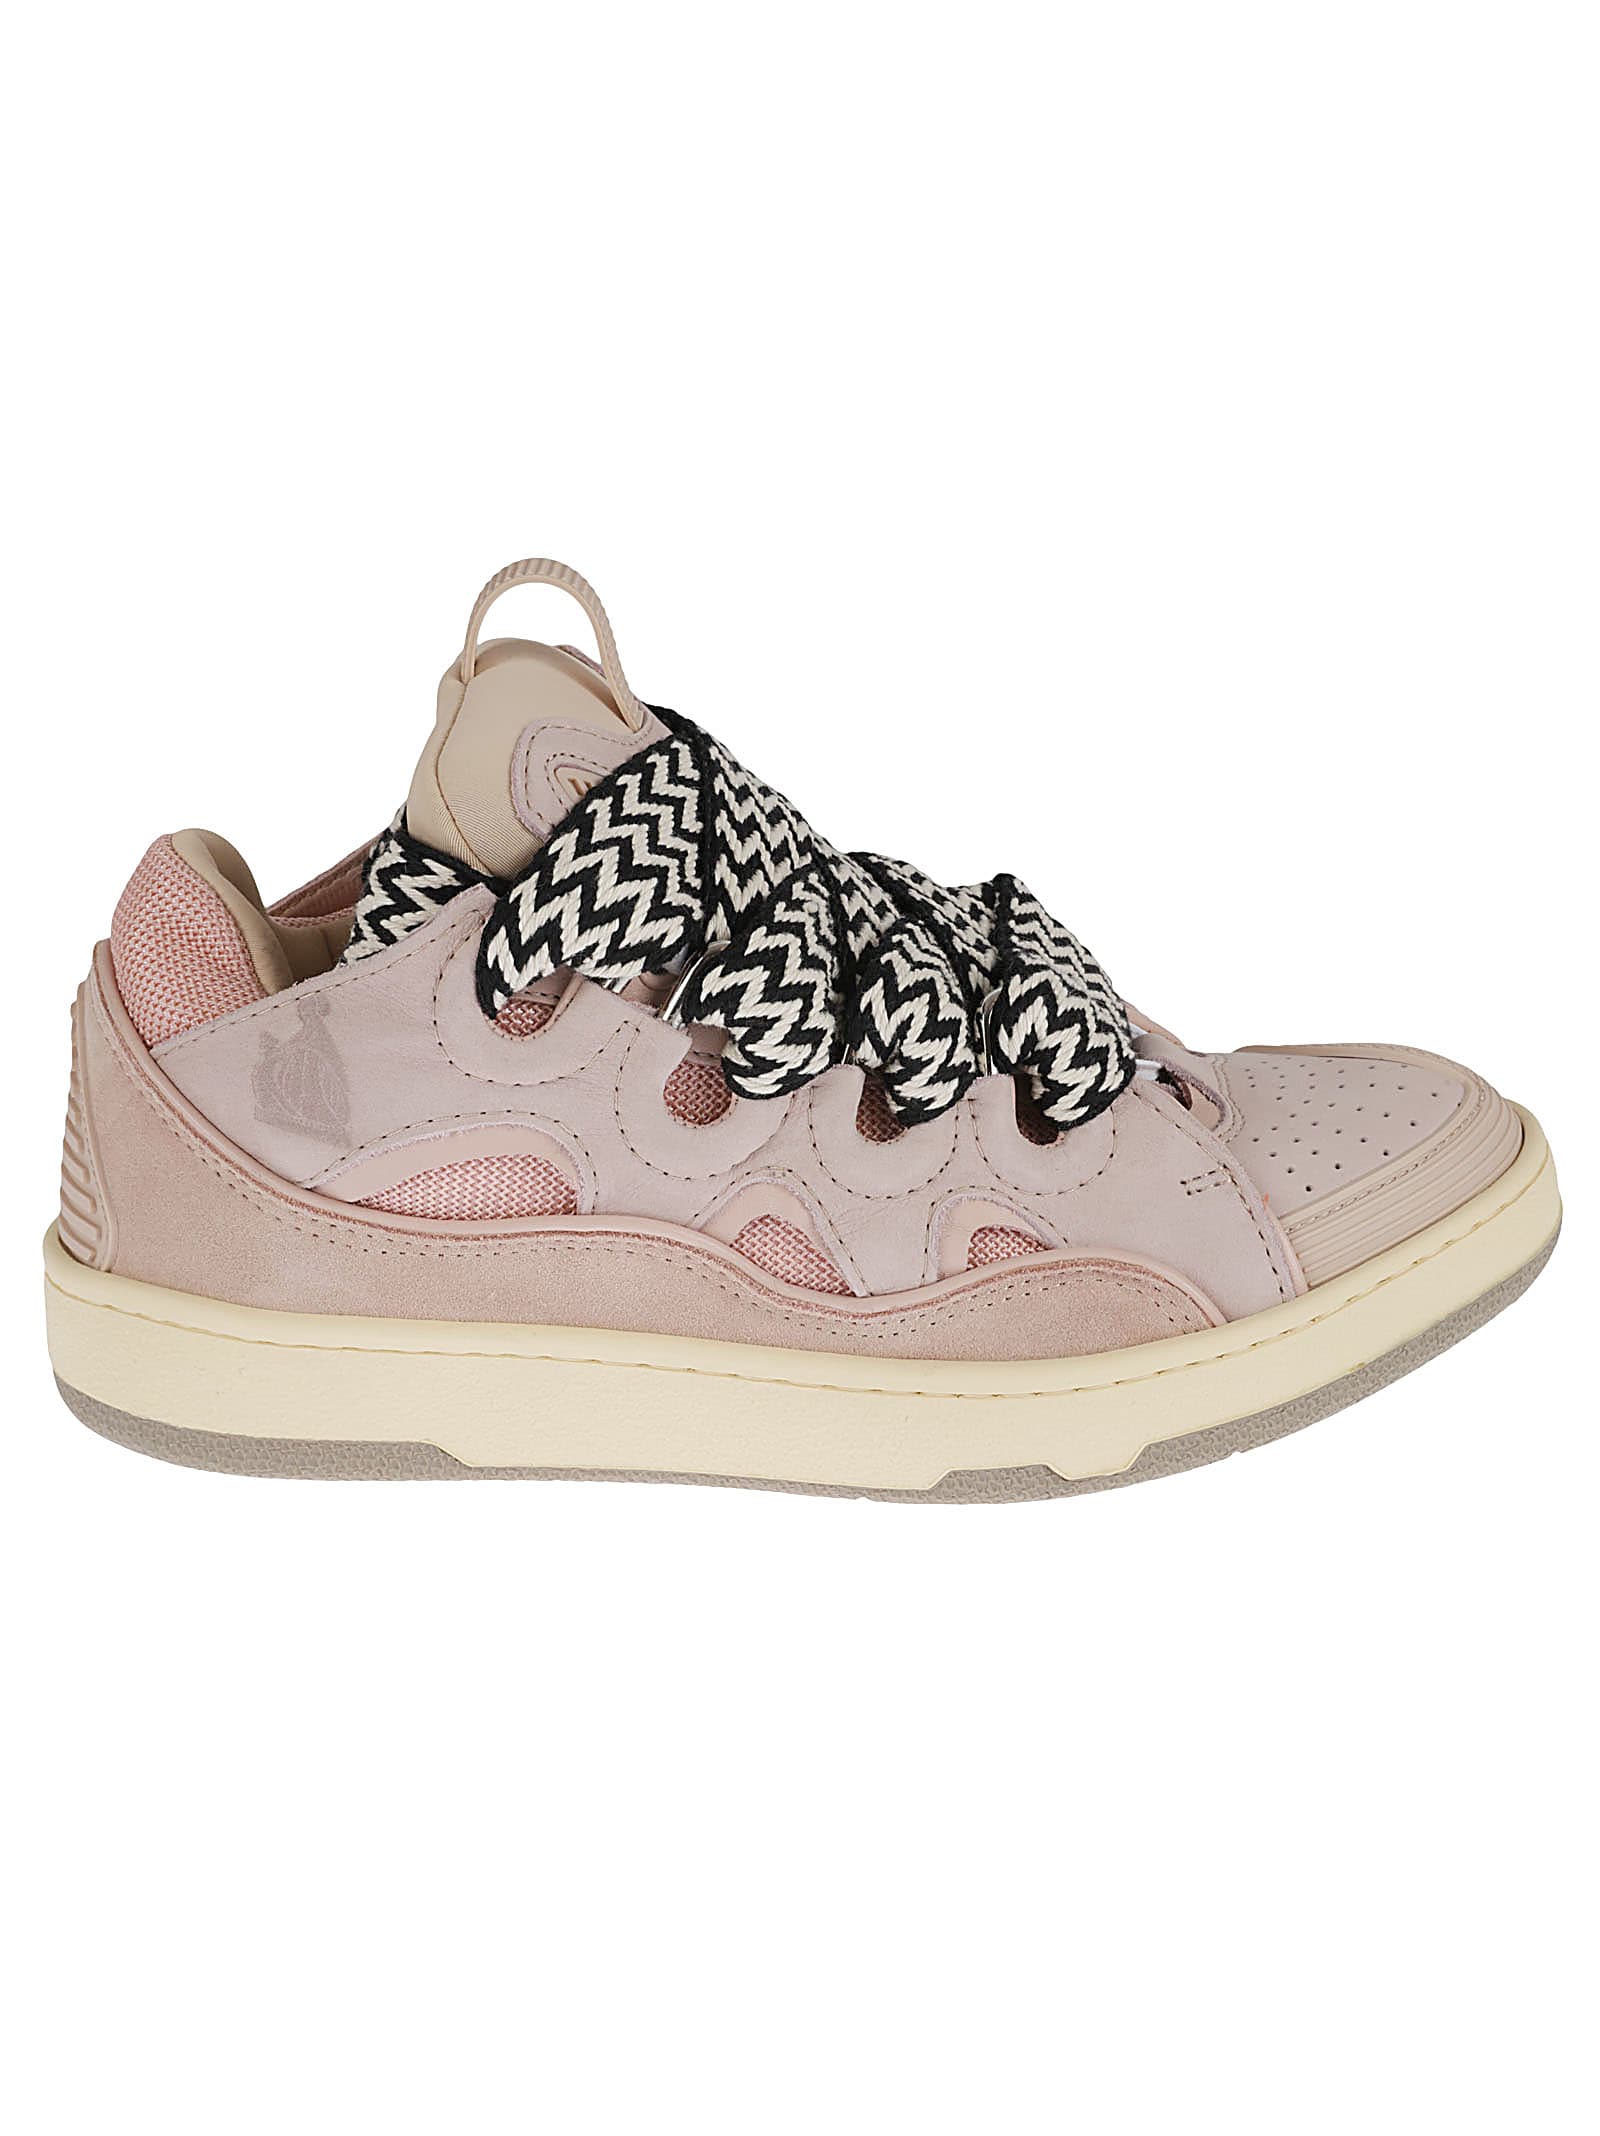 Lanvin Curb Leather Low-top Sneakers In Pale Pink | ModeSens